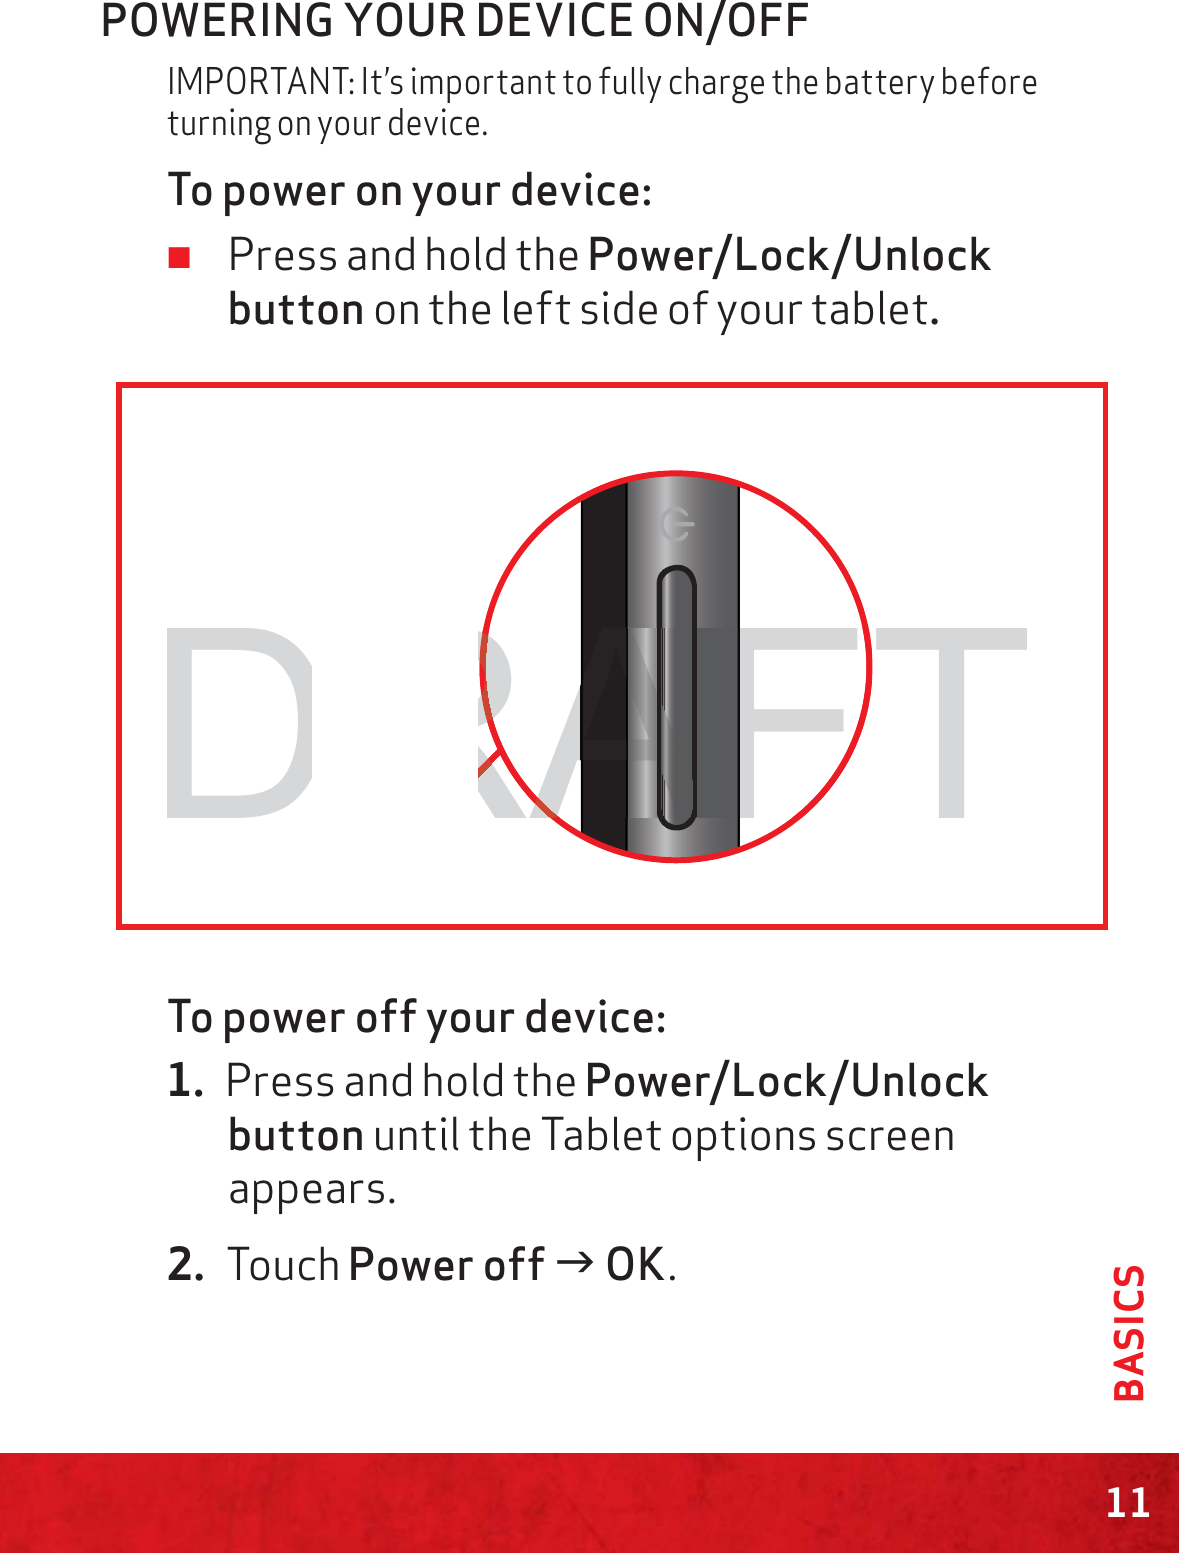 11BASICSPOWERING YOUR DEVICE ON/OFFIMPORTANT: It’s important to fully charge the battery before turning on your device.To power on your device:  ≠Press and hold the Power/Lock/Unlock button on the left side of your tablet.To power off your device: 1. Press and hold the Power/Lock/Unlock button until the Tablet options screen appears.2. Touch Power off J OK.FTAFAAAAAAAAAAAAAAAAAAAAAAAAAAAAAAAAAAAAAAAAAAAAAAAAAAAAAAAAAAAAAAAAAAAAAAARAAAAFAAAAAAAAAAAAAAAAAAAAAAAAAAAAAAAAAAAAAAAAAAAAAAAAAAAAAAAAAAAAAAAAAAAAAAAAAAAAAAAAAAAAAAAAAAAAAAAAAAAAAAAAAAAAAAAAAAAAAAAAAAAAAAAADRARRRRRRRRRRRRRRRRRRRRRRRRRRRRRRRRRRRRRRRRRRRRRRRRRRRRRRRRRRRRRRRRRRRRRRRRRRRRRRRRRRRRRRRRRRRRRRRRRRRRRRRRRRRRRRRRRRRRRRRRRRRRRRRRRRRRRRRRRRRRRRRRRRRRRRRRRRRRRRRRRRRRRRRRRRRRRRRRRRRRRRRRRRRRRRRRRRRRRRRRRRRRRRRRRRRRRRRRRRRRRRRRRRRRRRRRRRRRRRRRRRRRRRRRRRRRRRRRRRRRRRRRRRRRRRRRRRRRRRRRRRRRRRRRRRRRRRRRRRRRRRRRRRRRRRRRRRRRRRRRRRRRRRRRRRRRRRRRRRRRRRRRRRRRRRRRRRRRRRRRRRRRRRRRRRRRRRRRRRRRRRRRRRRRRRRRRRRRRRRRRRRRRRRRRRRRRRRRRRRRRRRRRRRRRRRRRRRRRRRRRRRRRRRRRRRRRRRRRRRRRRRRRRRRRRRRRRRRRRRRRRRRRRRRRRRRRRRRRRRRRRRRRRRRRRRRRRRRRRRRRRRRRRRRRRRRRRRRRRRRRRRRRRRRRRRRRRRRRRRRRRRRRRRRRRRRRRRRRRRRRRRRRRRRRRRRRRRRRRRRRRRRRRRRRAF